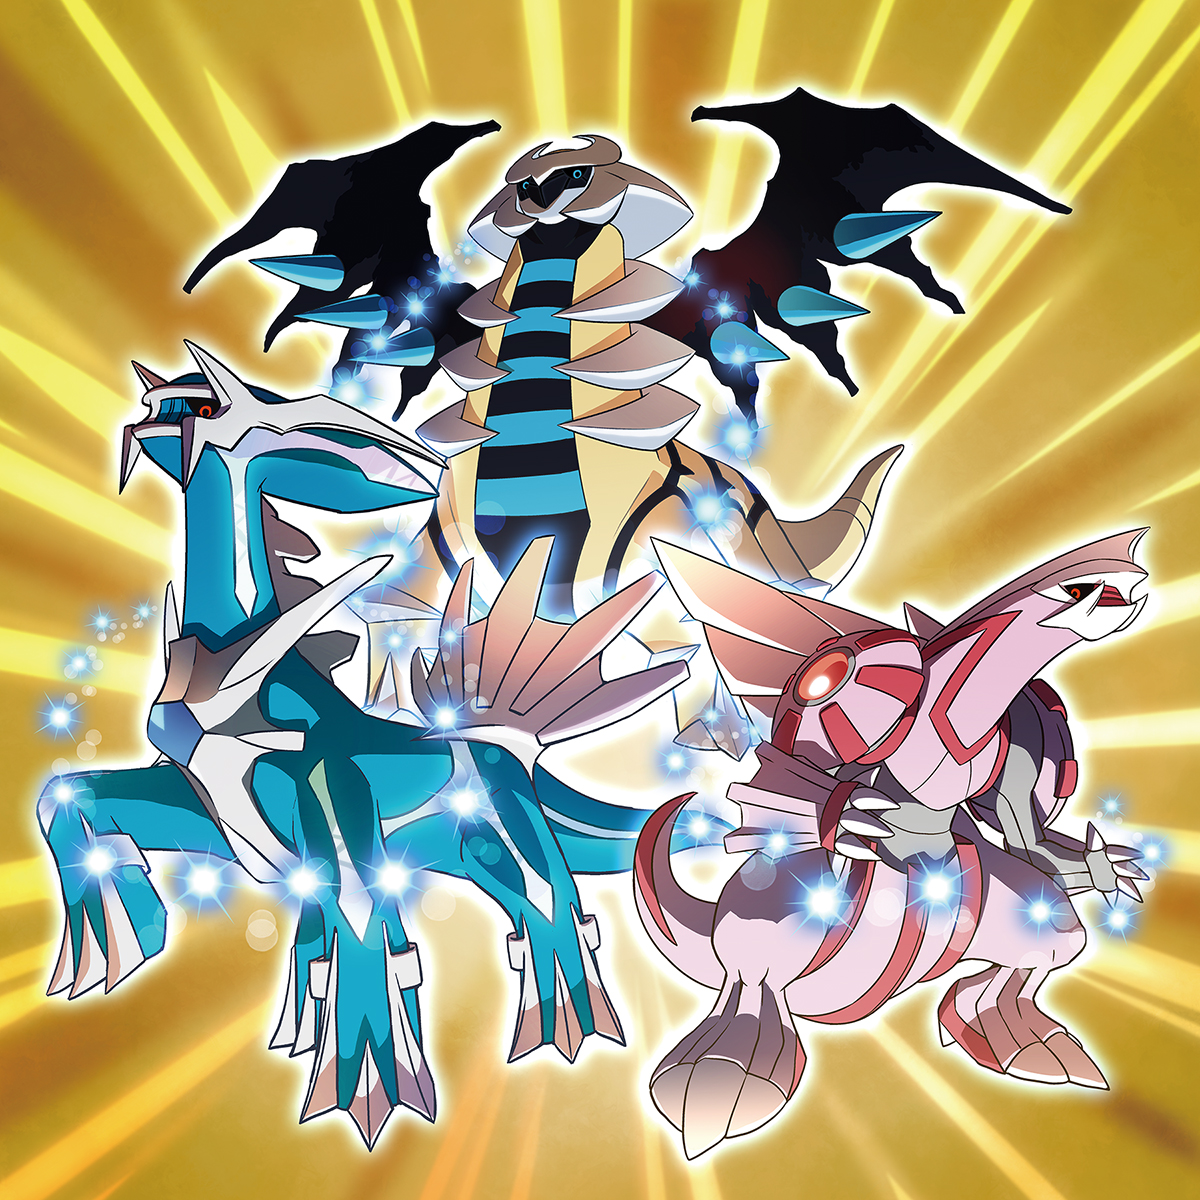 Get Your Extremely Rare Shiny Version of the Legendary Pokémon Dialga Only at GameStop Stores